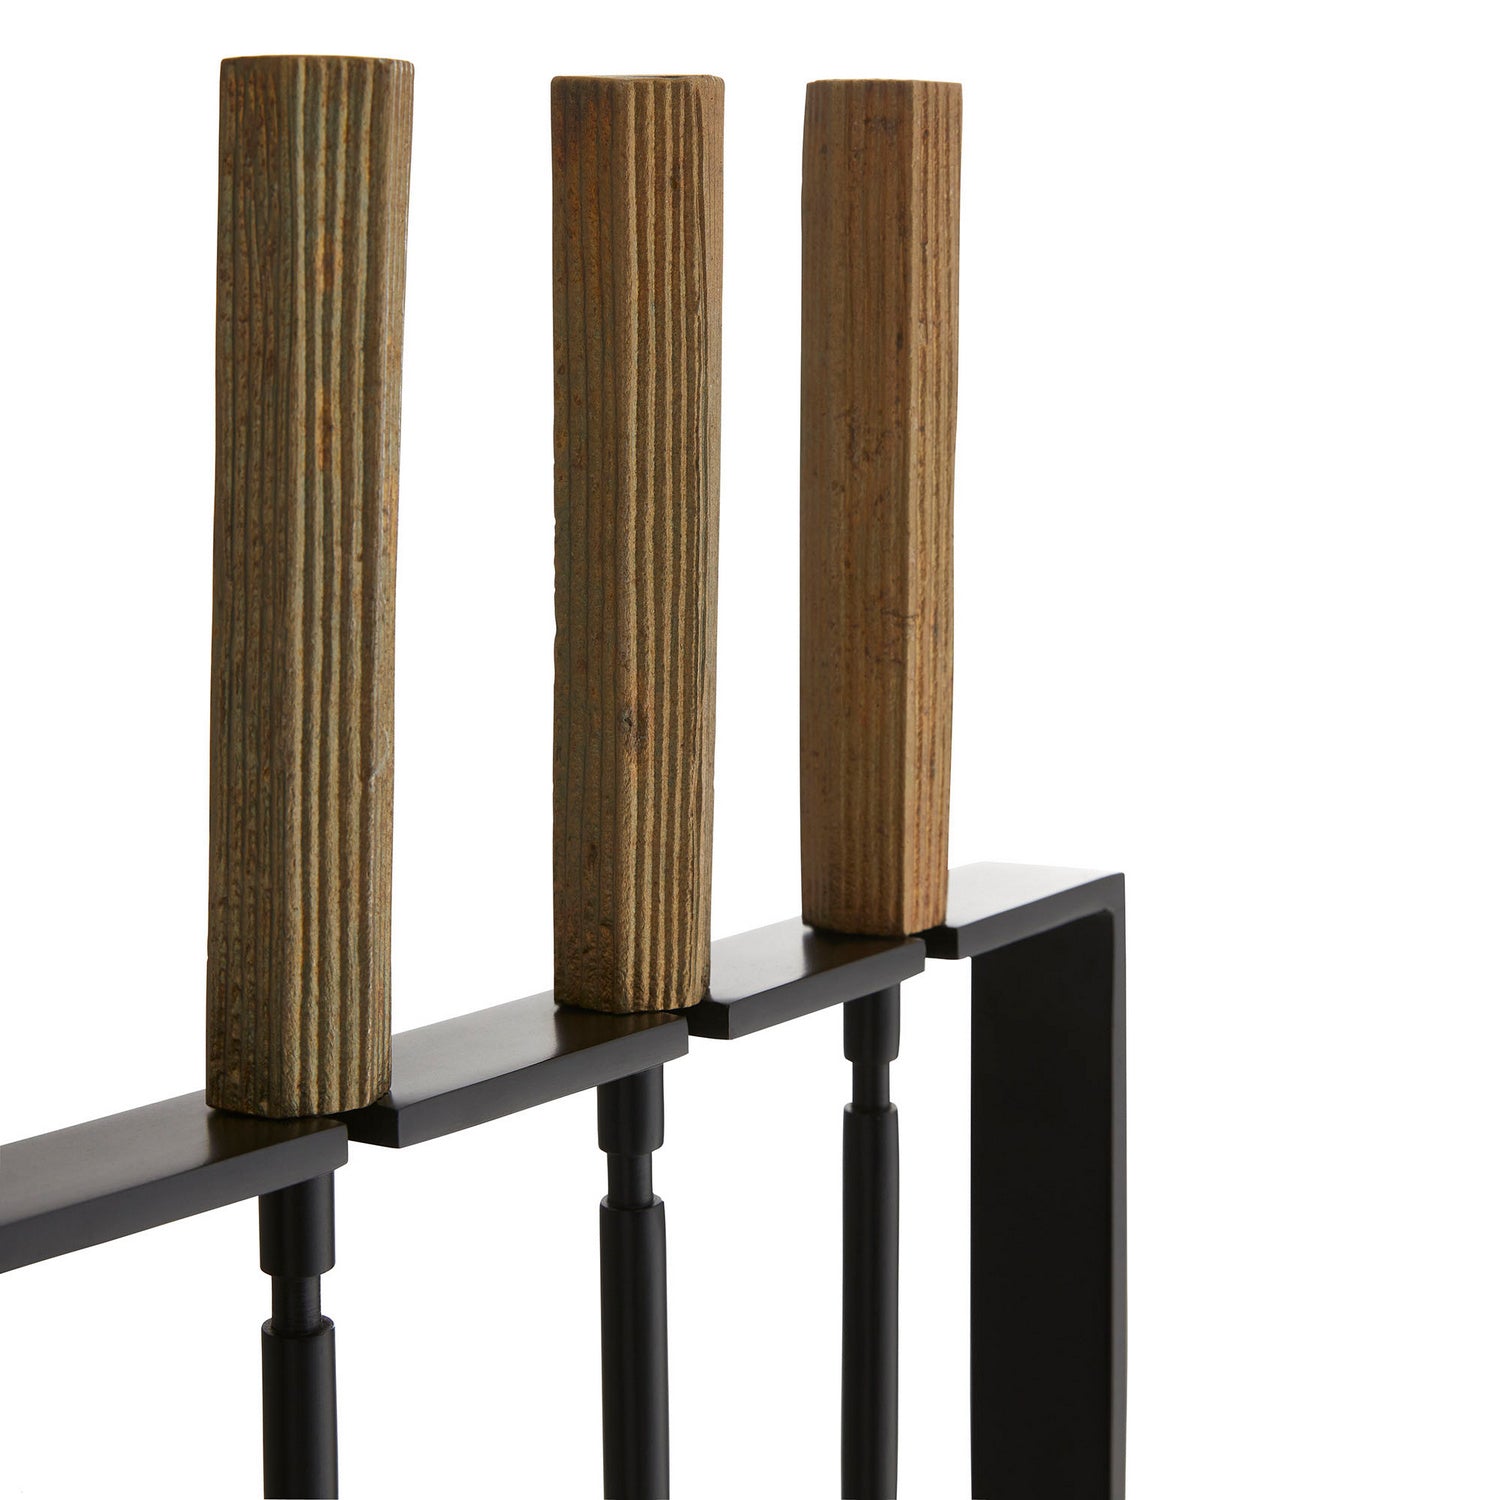 Fireplace Tool Set from the Landt collection in Blackened Iron finish